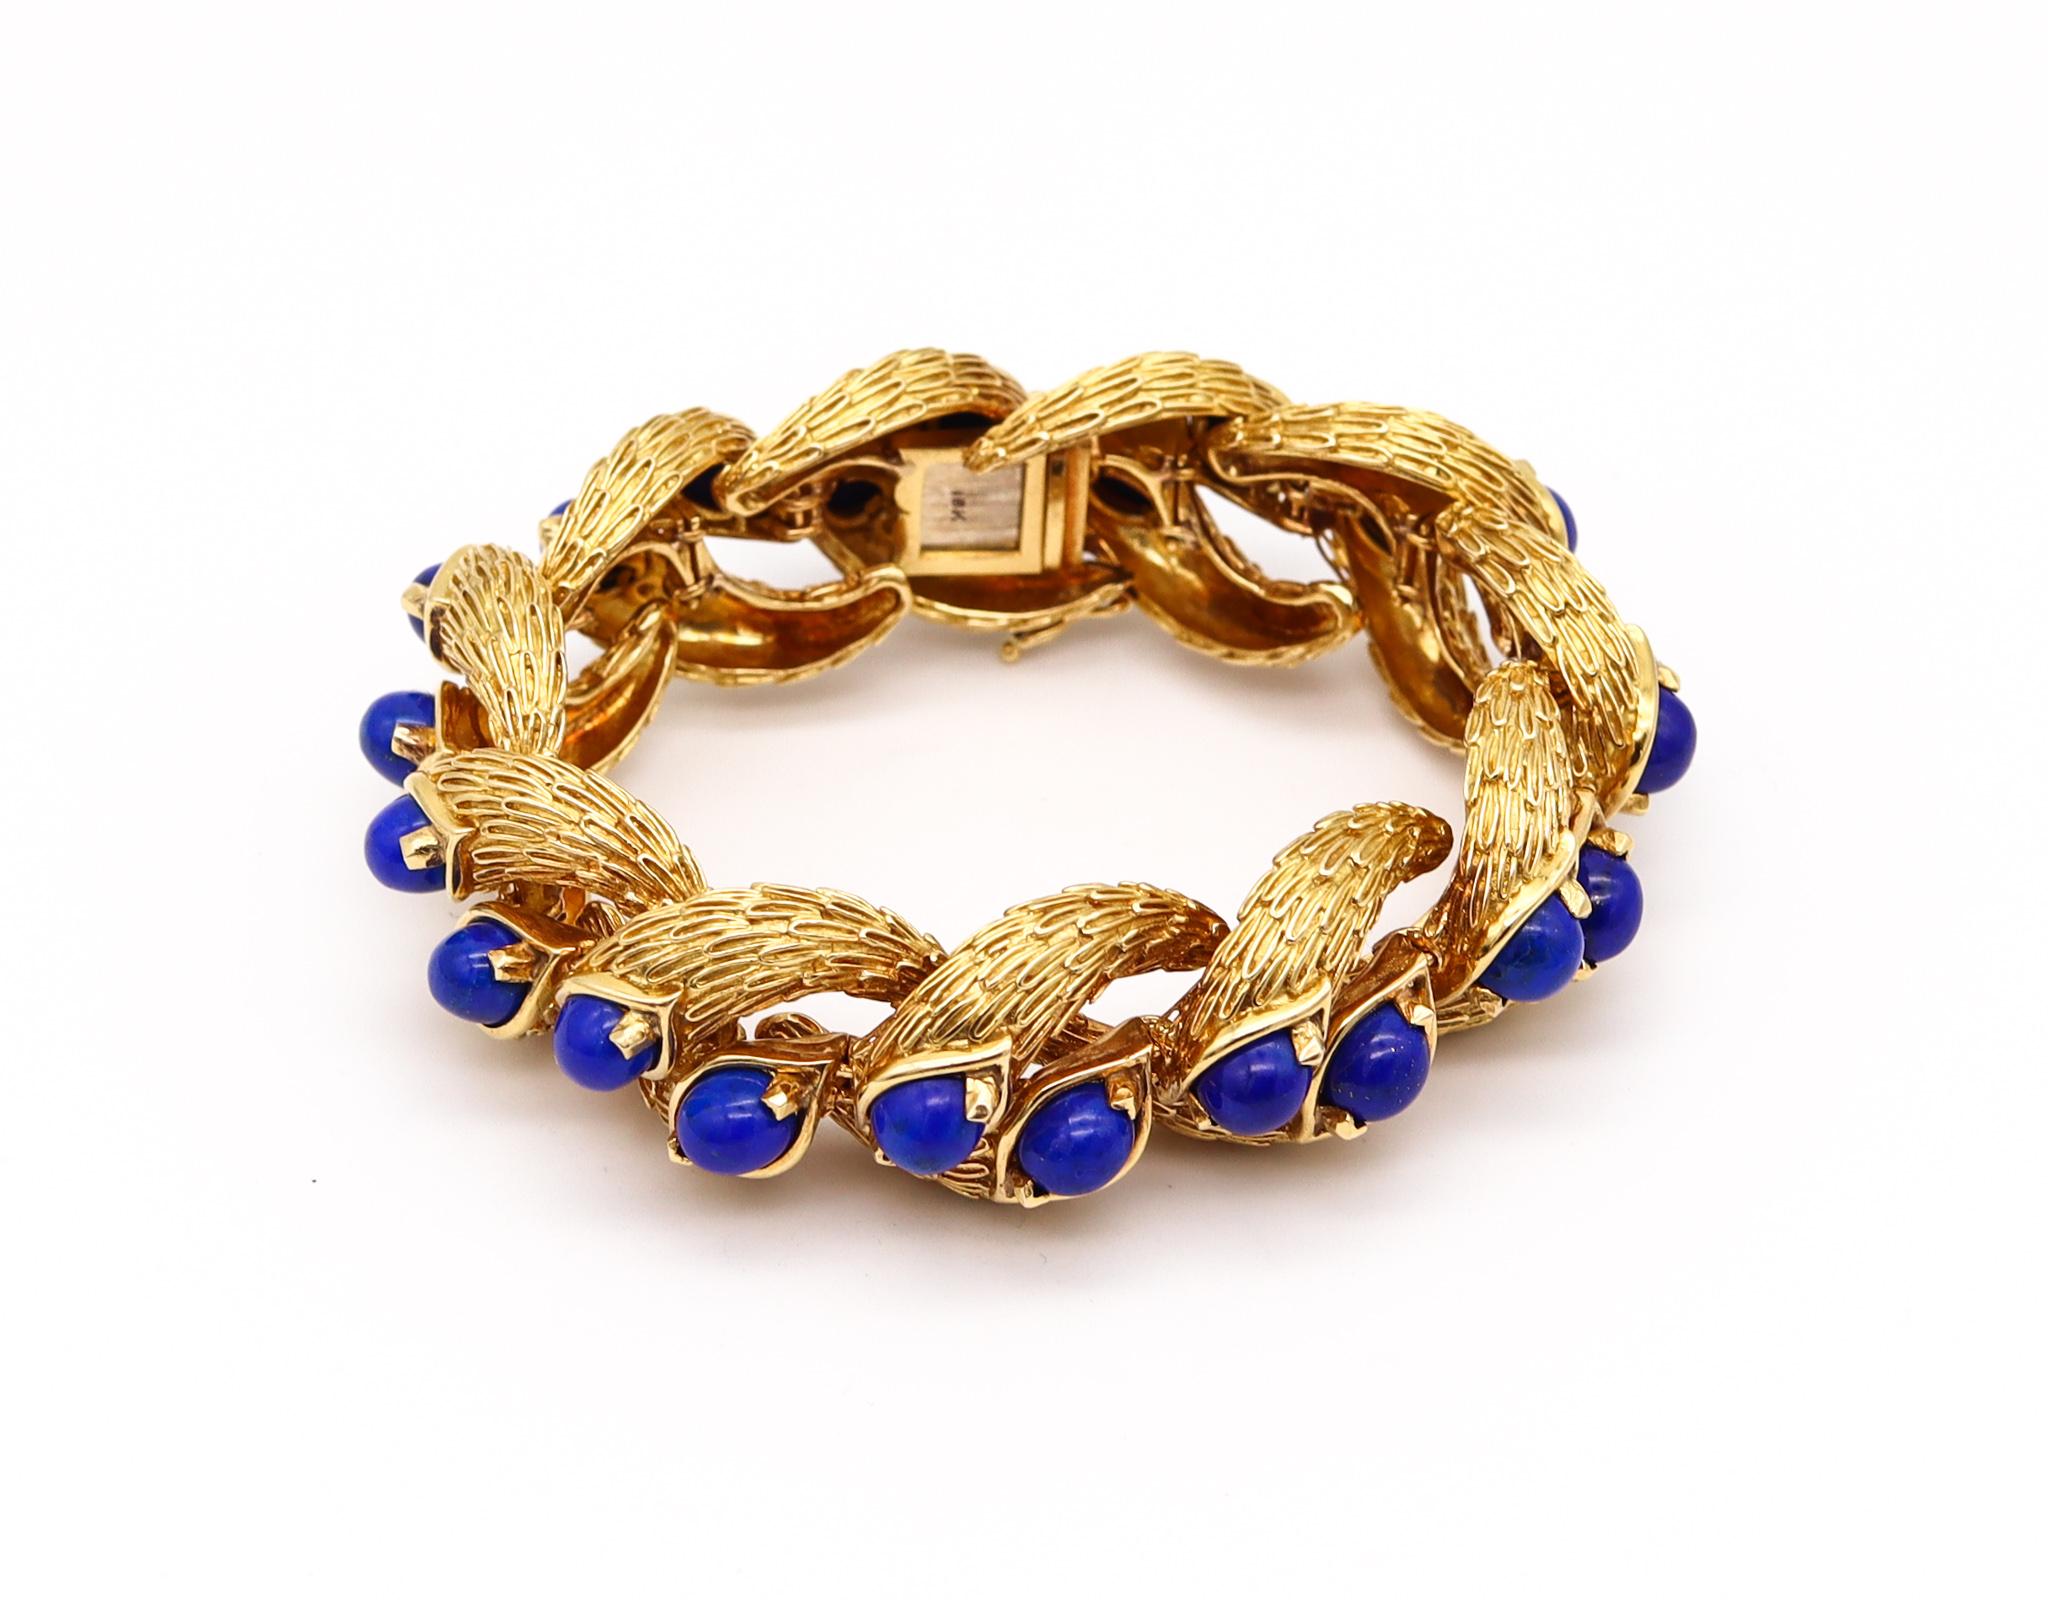 Modernist Carlo Weingrill 1960 Byzantine Bracelet in 18Kt Yellow Gold with Lapis Lazuli For Sale